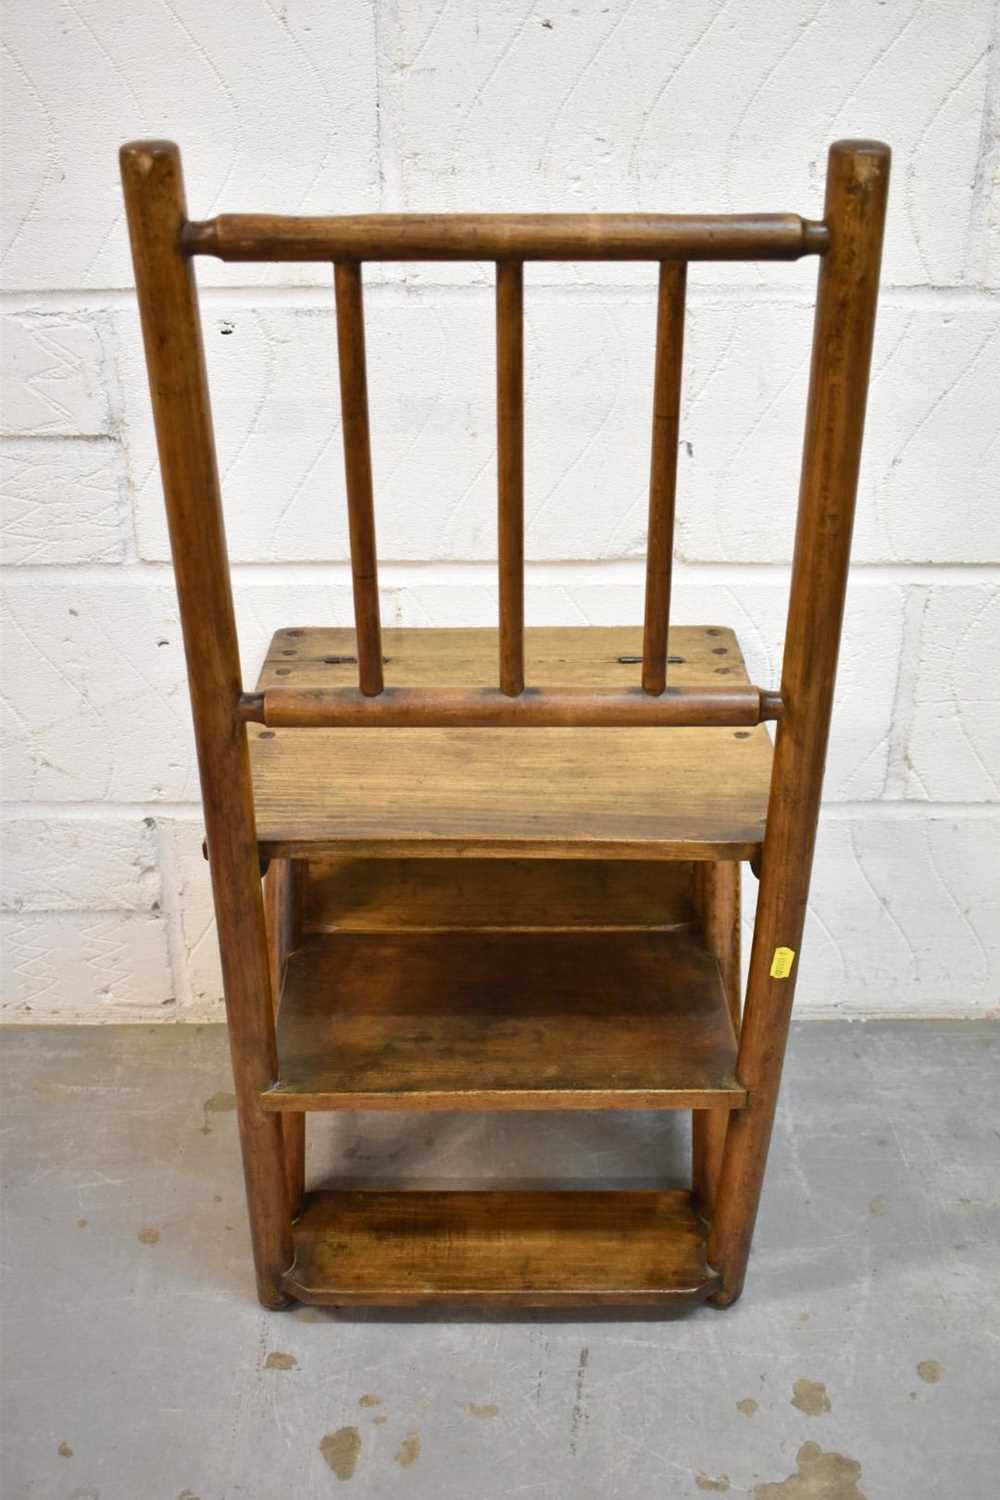 Victorian beech metamorphic library chair - Image 4 of 7